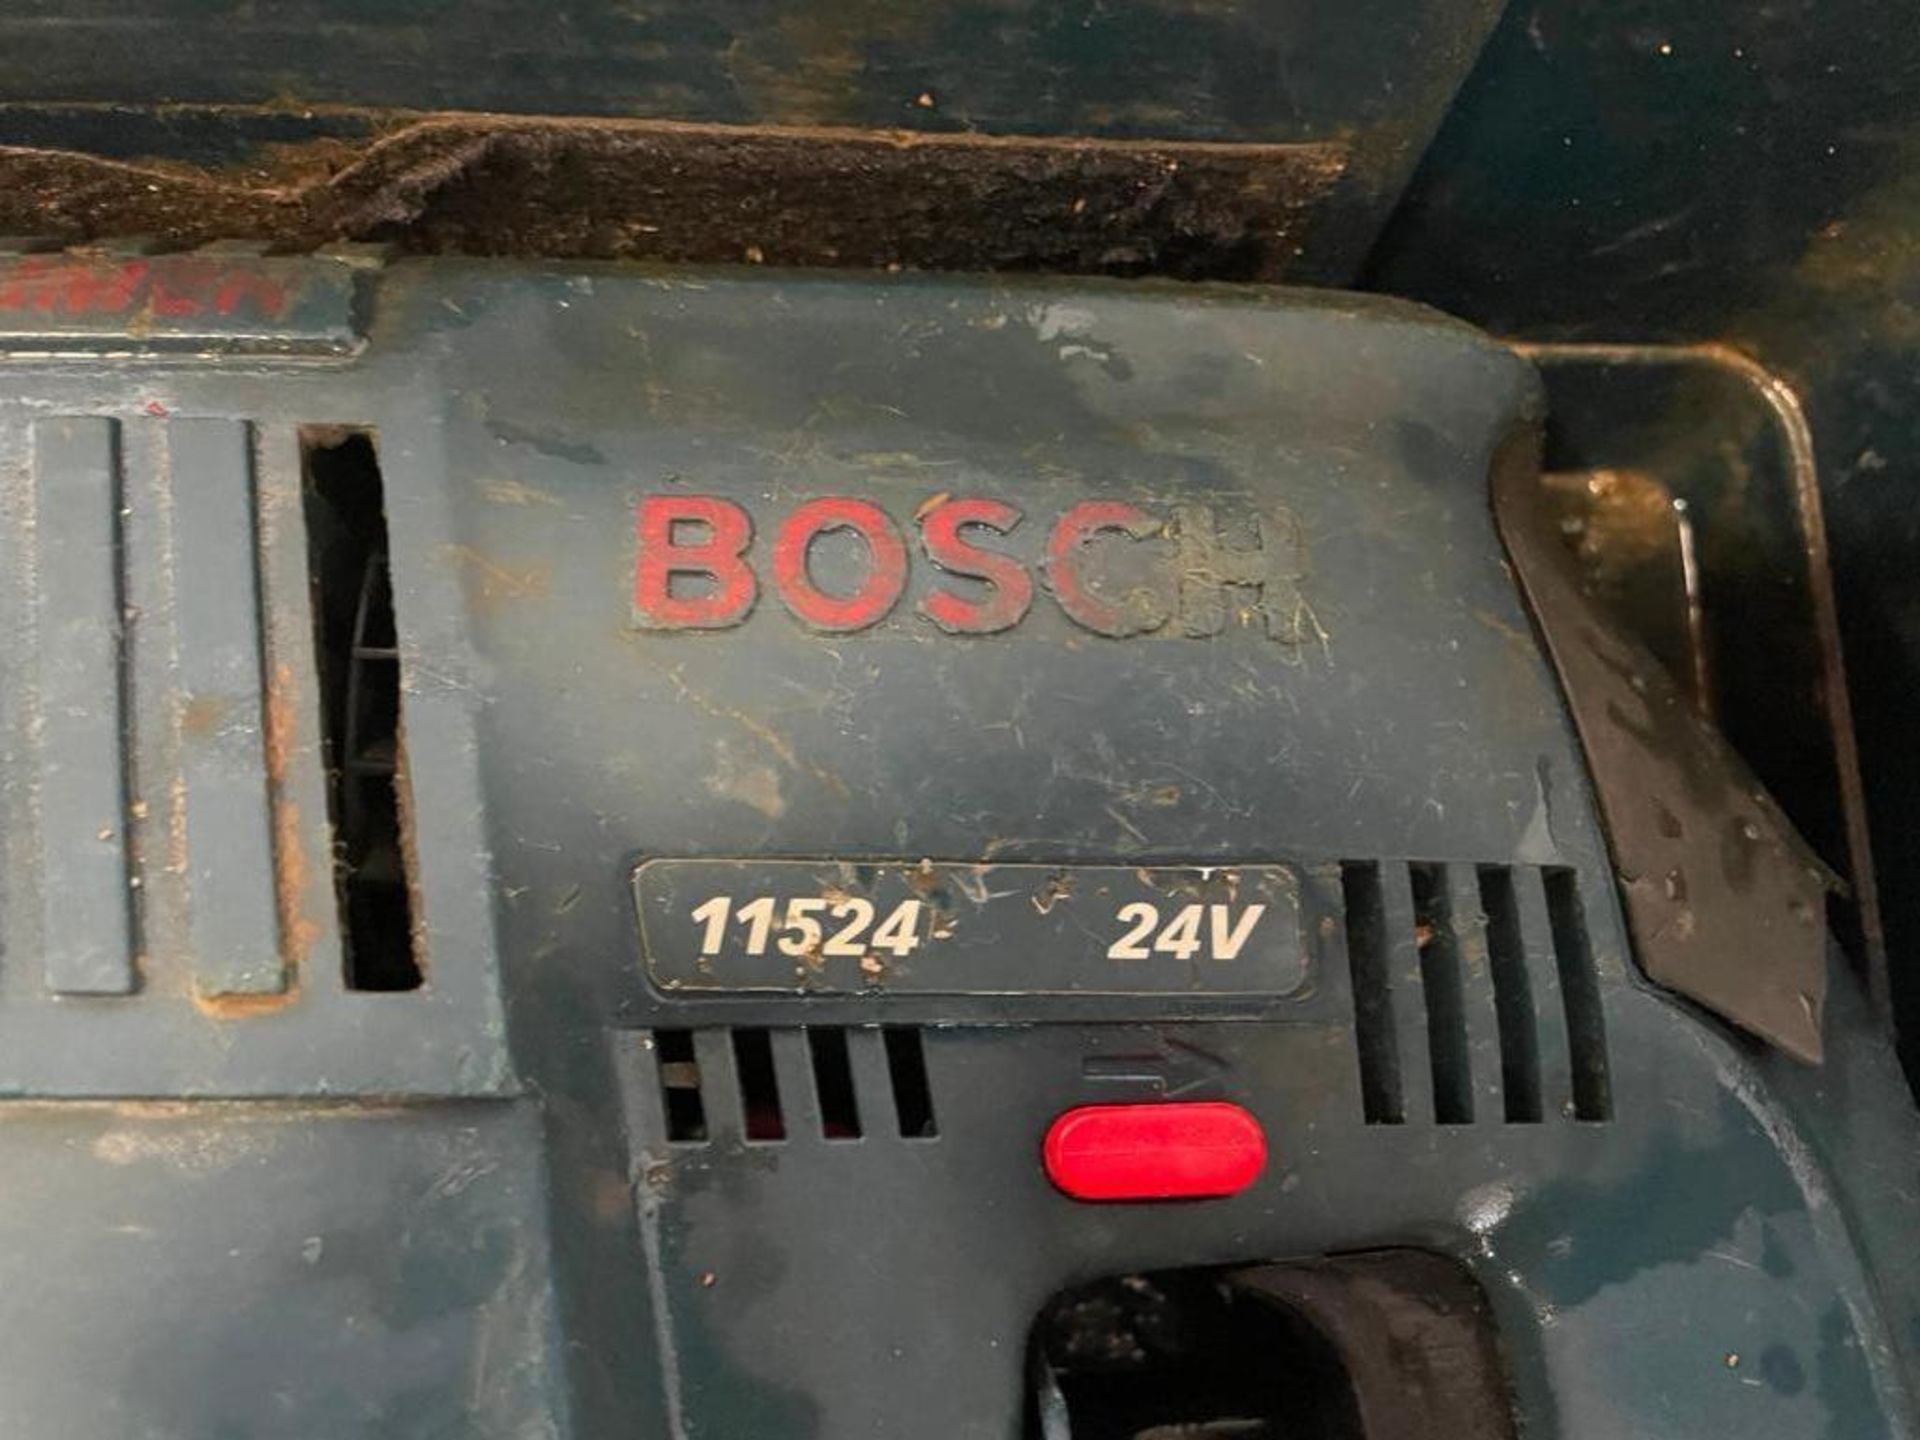 Bosch 11524 Rotary Hammer, 24V. Located in Hazelwood, MO - Image 4 of 9